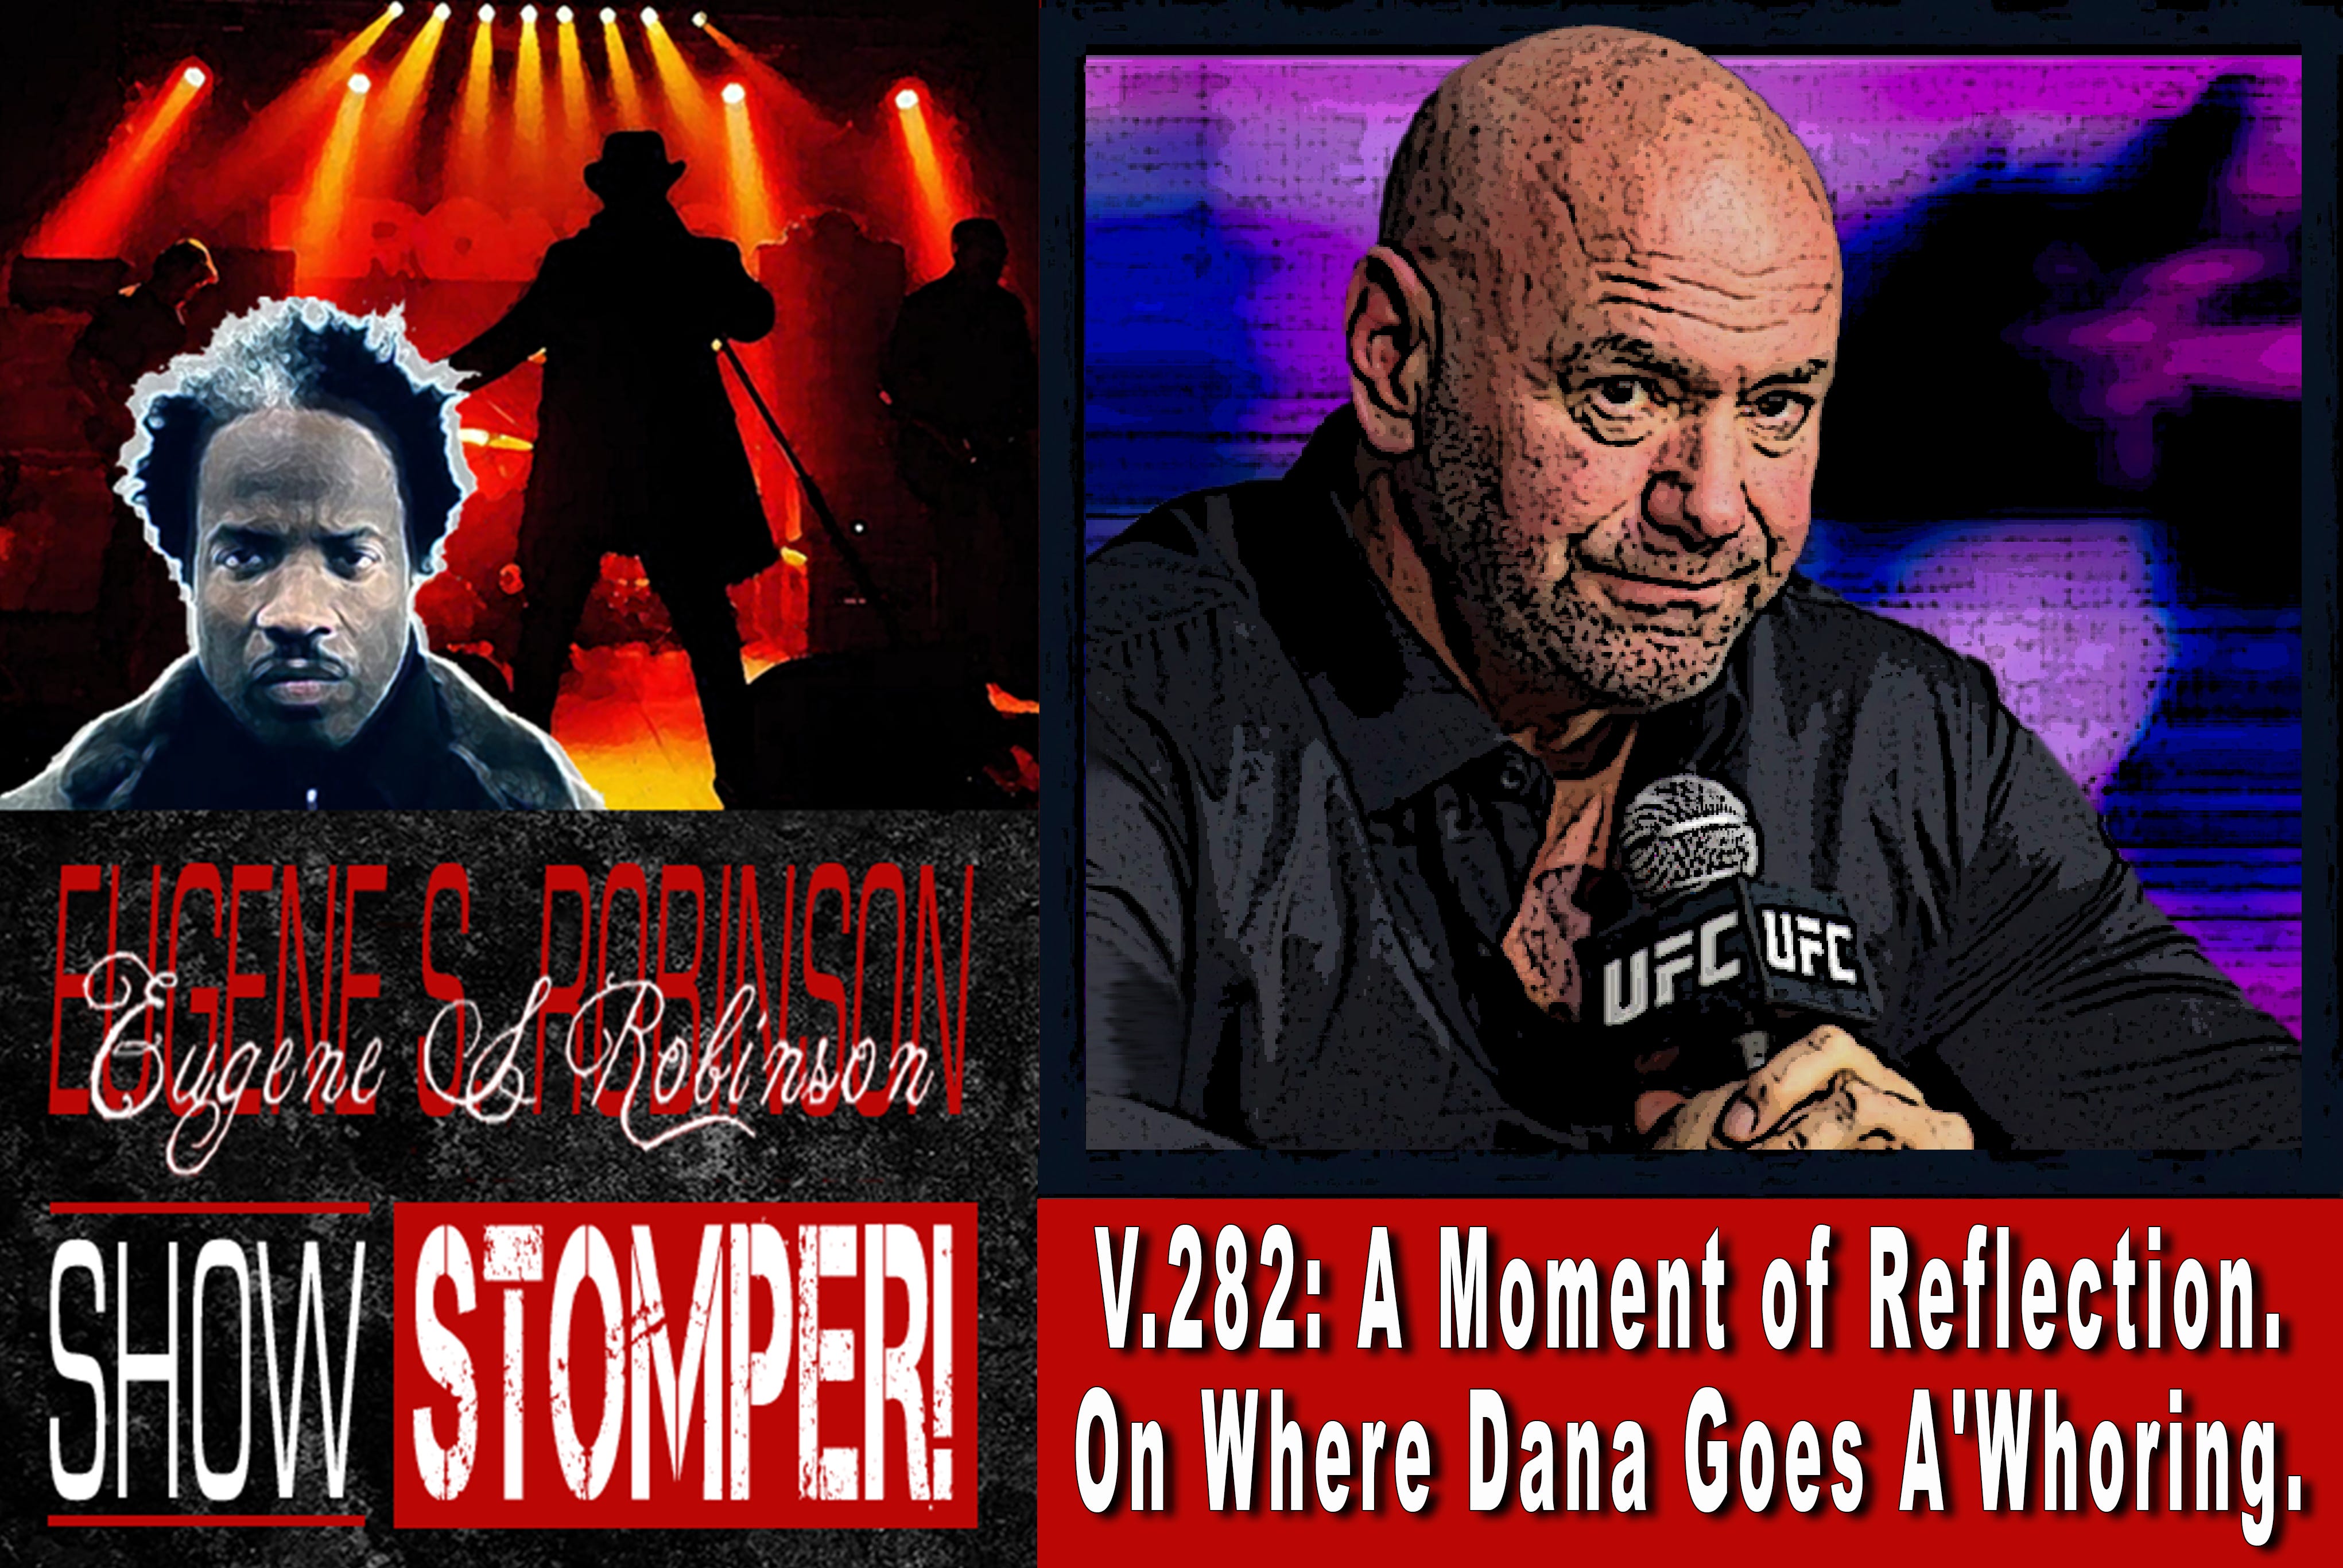 V.282: A Moment of Reflection. On Where Dana Goes A'Whoring. On The Eugene S. Robinson Show Stomper!